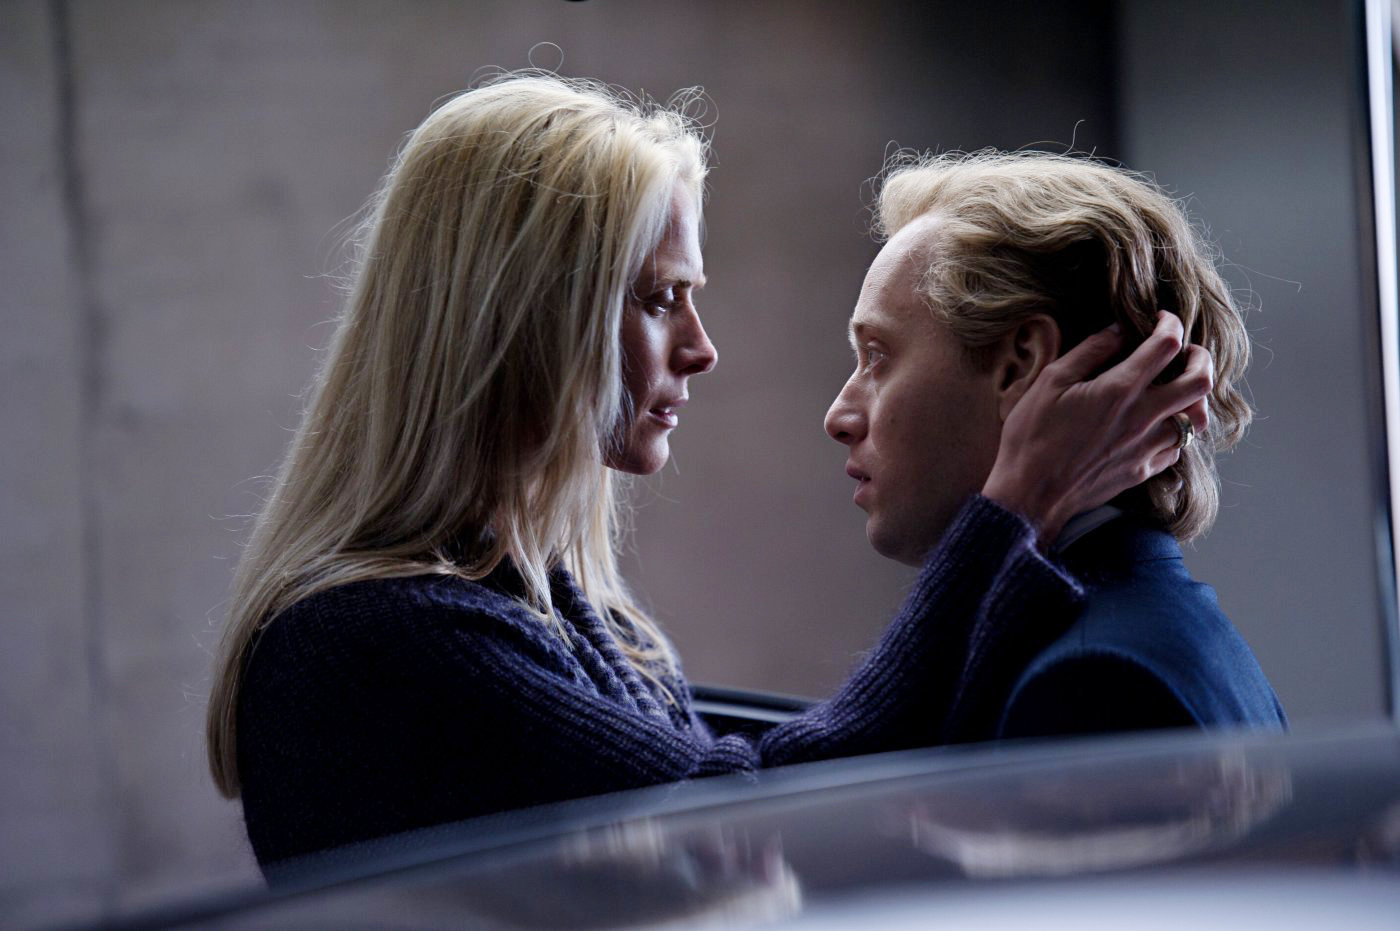 Synnove Macody Lund stars as Diana Brown and Aksel Hennie stars as Roger Brown in Magnolia Pictures' Headhunters (2012)